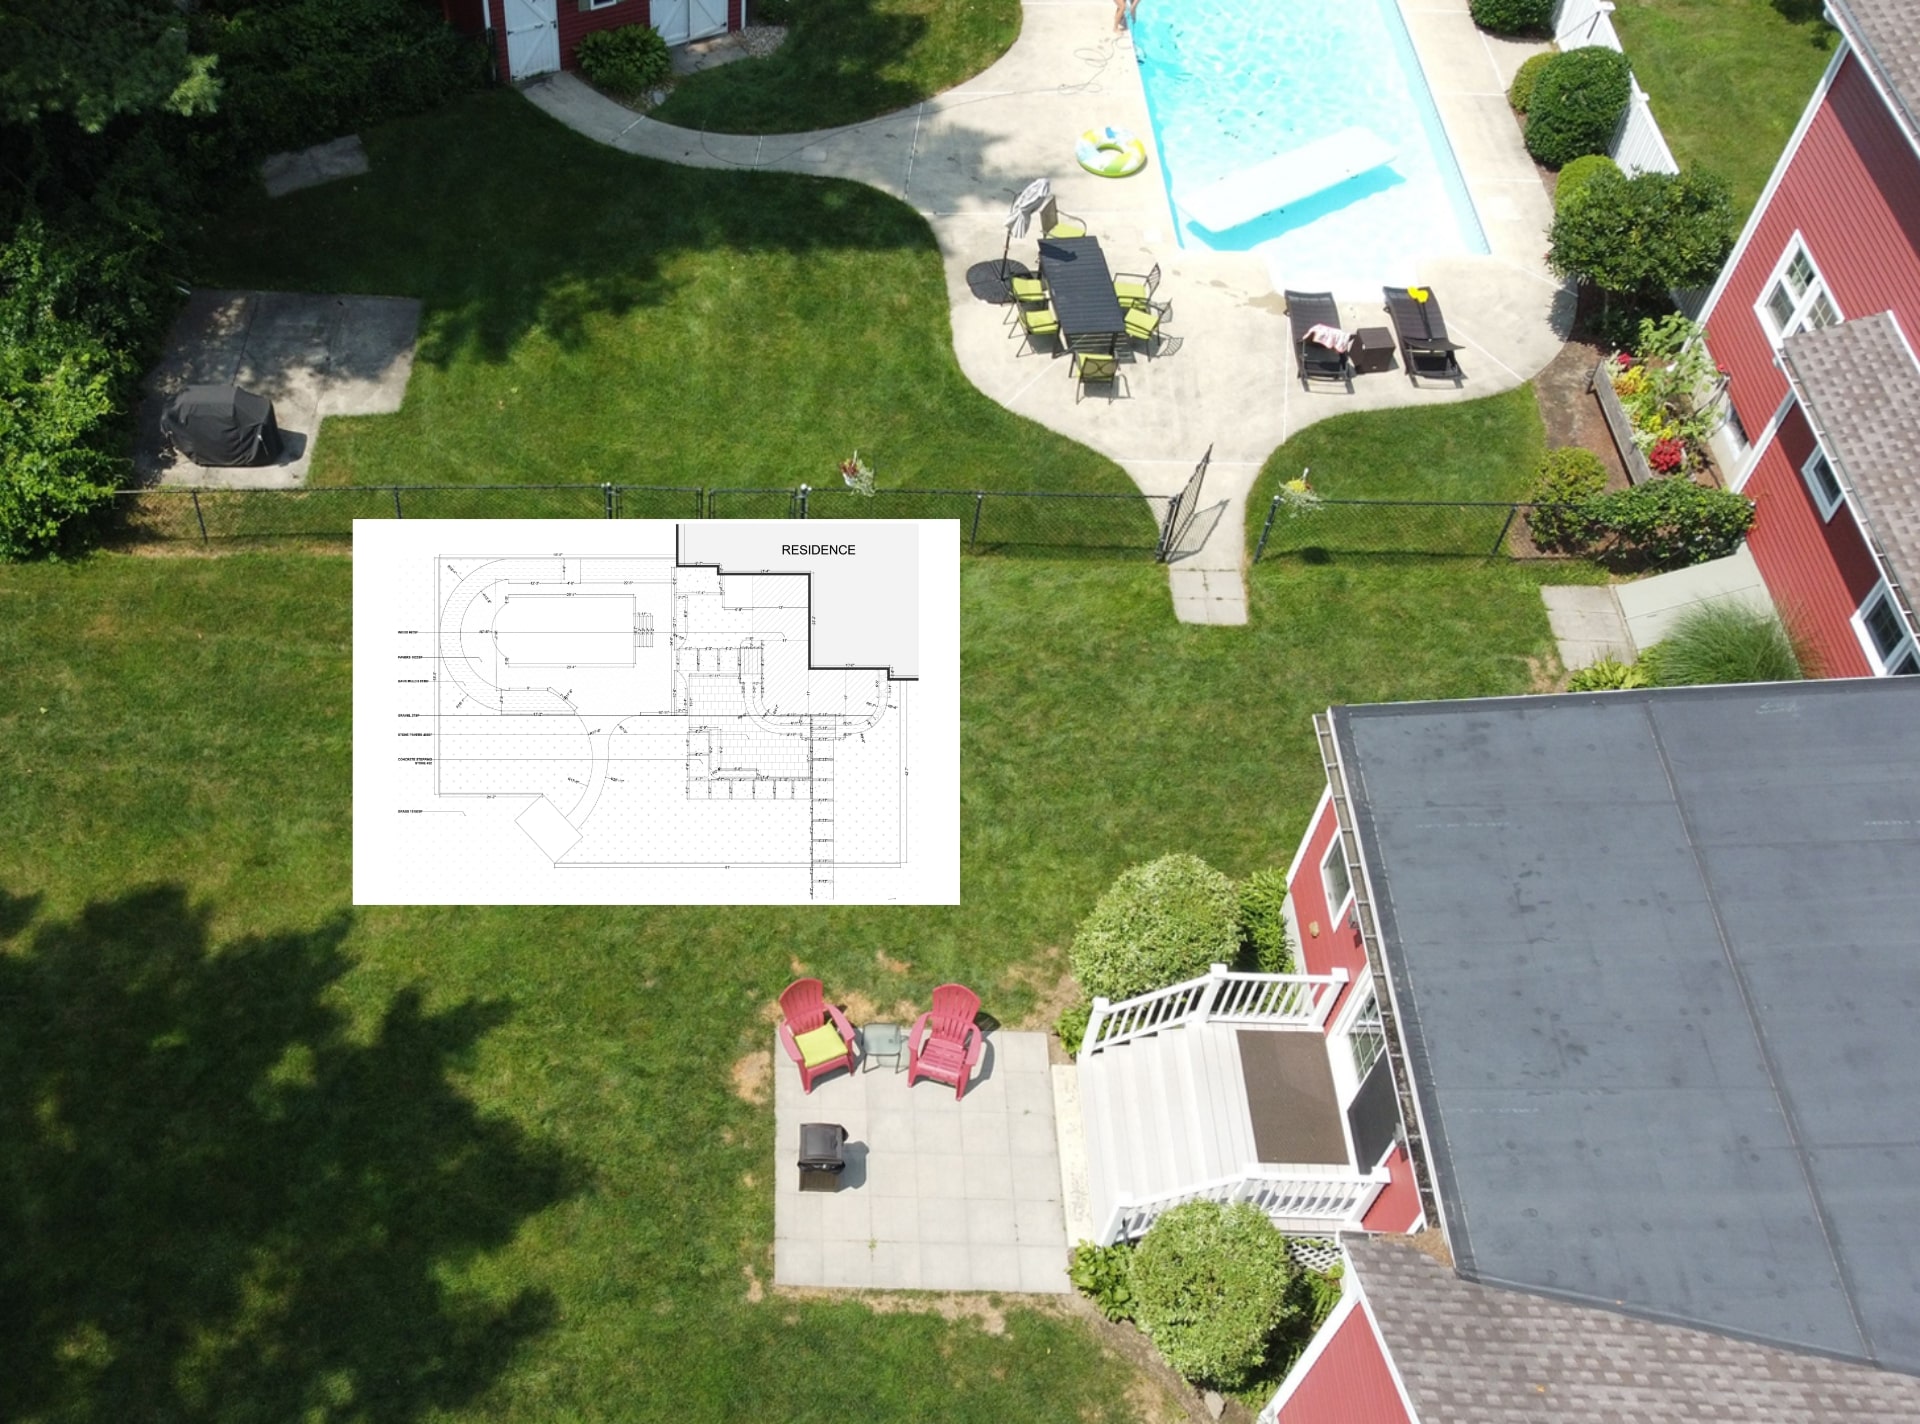 Aerial view of a residential property with an overlaid 2D plan indicating design layout